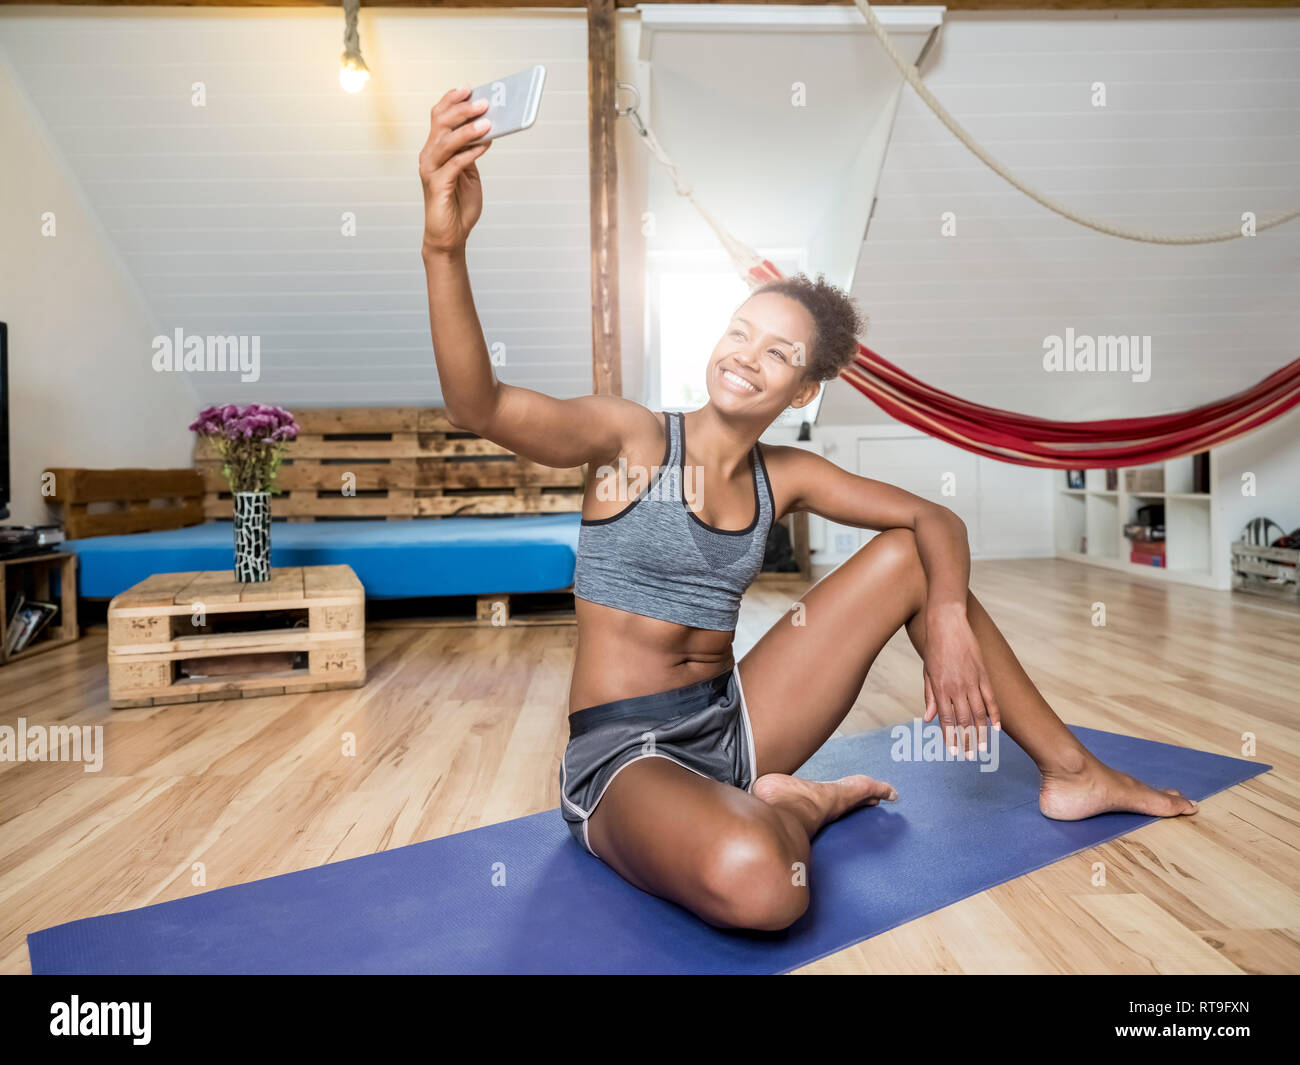 Smiling young woman sitting on yoga mat taking a selfie Stock Photo